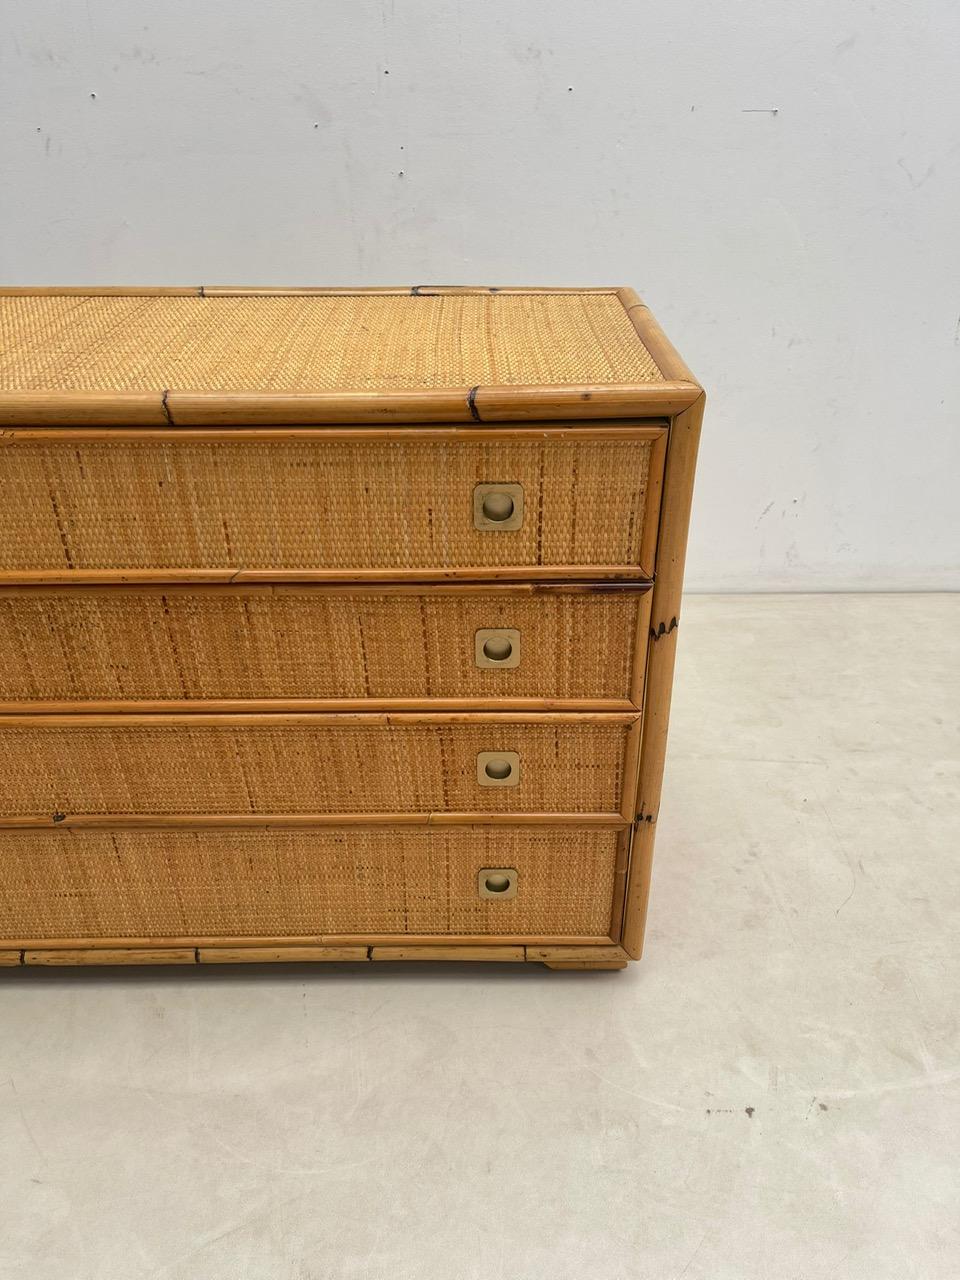 Dal Vera Bamboo and Wicker/Rattan Chest of Drawers, Italy 1960s For Sale 7